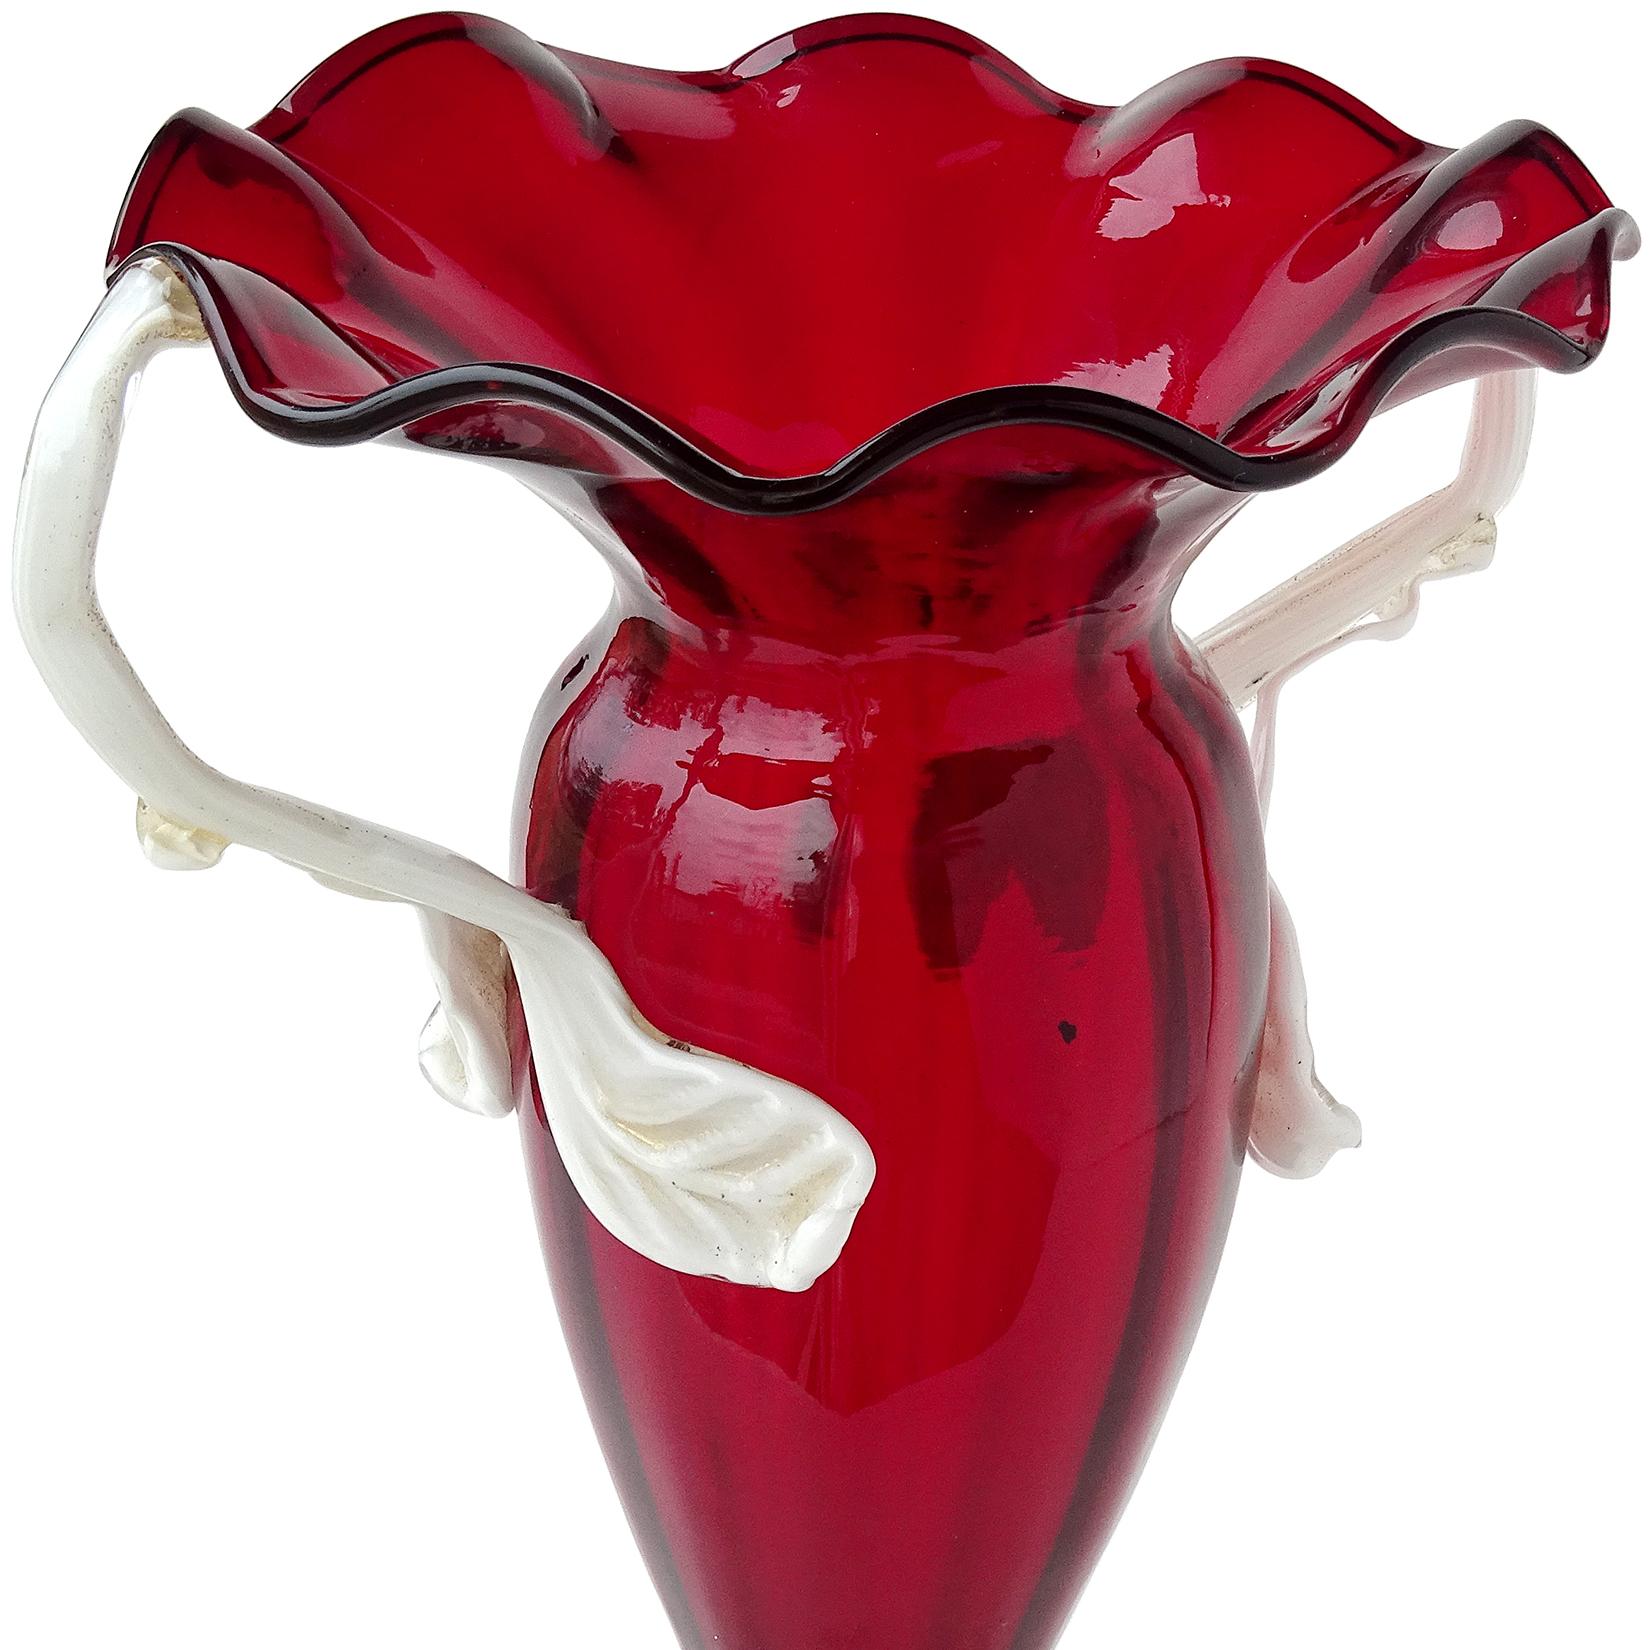 Beautiful antique Murano hand blown rich red Italian art glass flower vase, with white leaf handle decorations dusted with gold. Documented and labelled as Artistica Soffiera Vetreria - Barovier Seguso Ferro. The company was in business for only 4